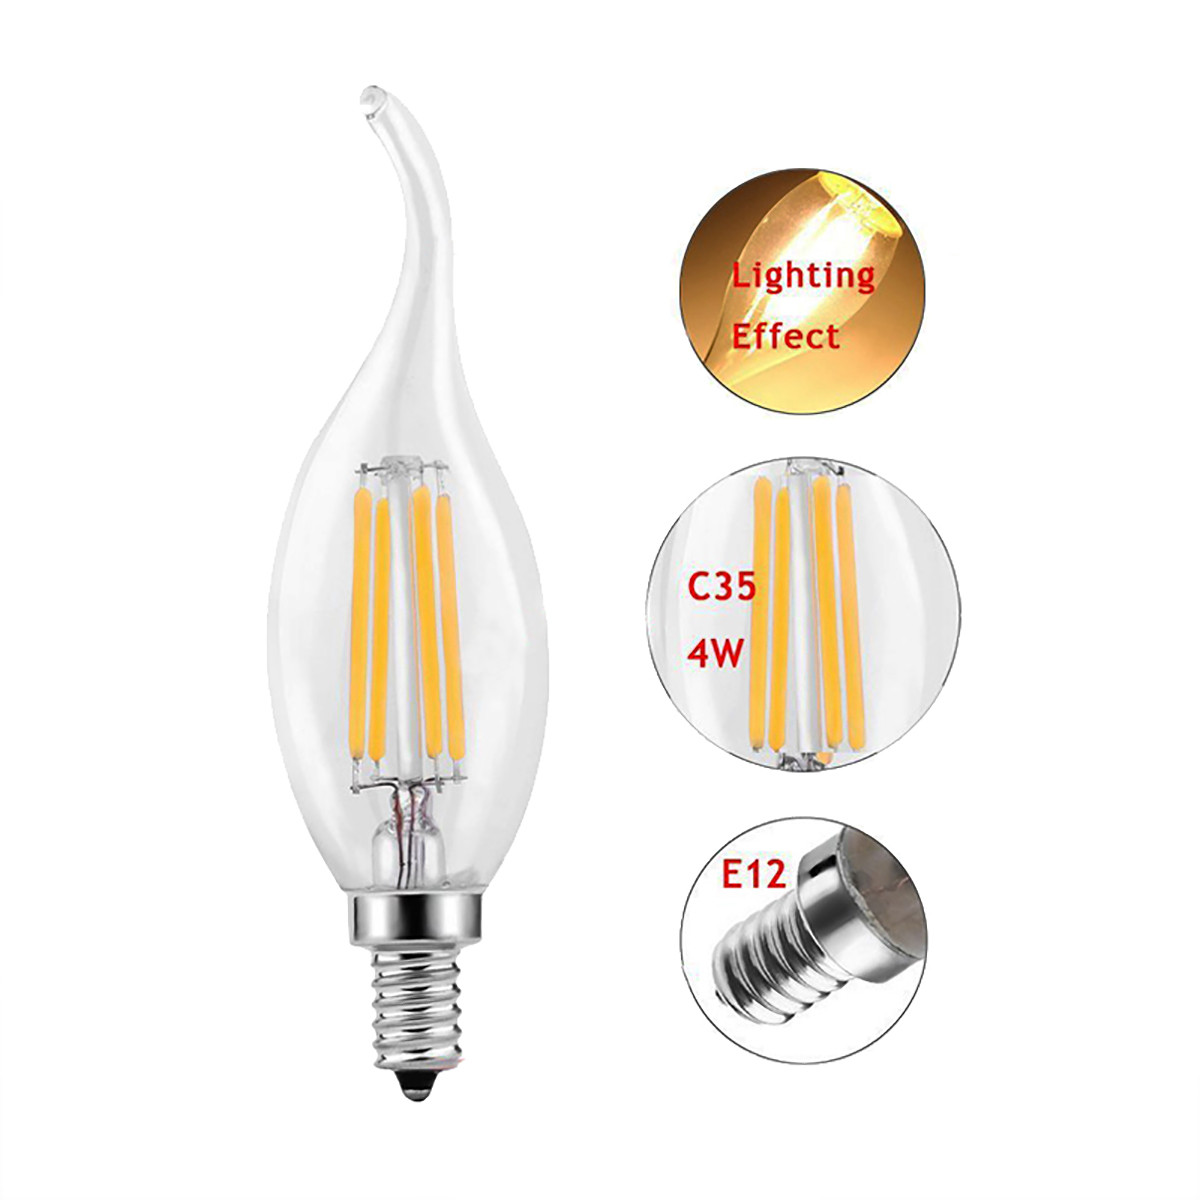 Appearance Goods nickel 6W Filament LED Candle Light Bulb Light C35 Flame Tip Chandelier Bulb with  E14 Base 60W Equivalent Halogen Replacement